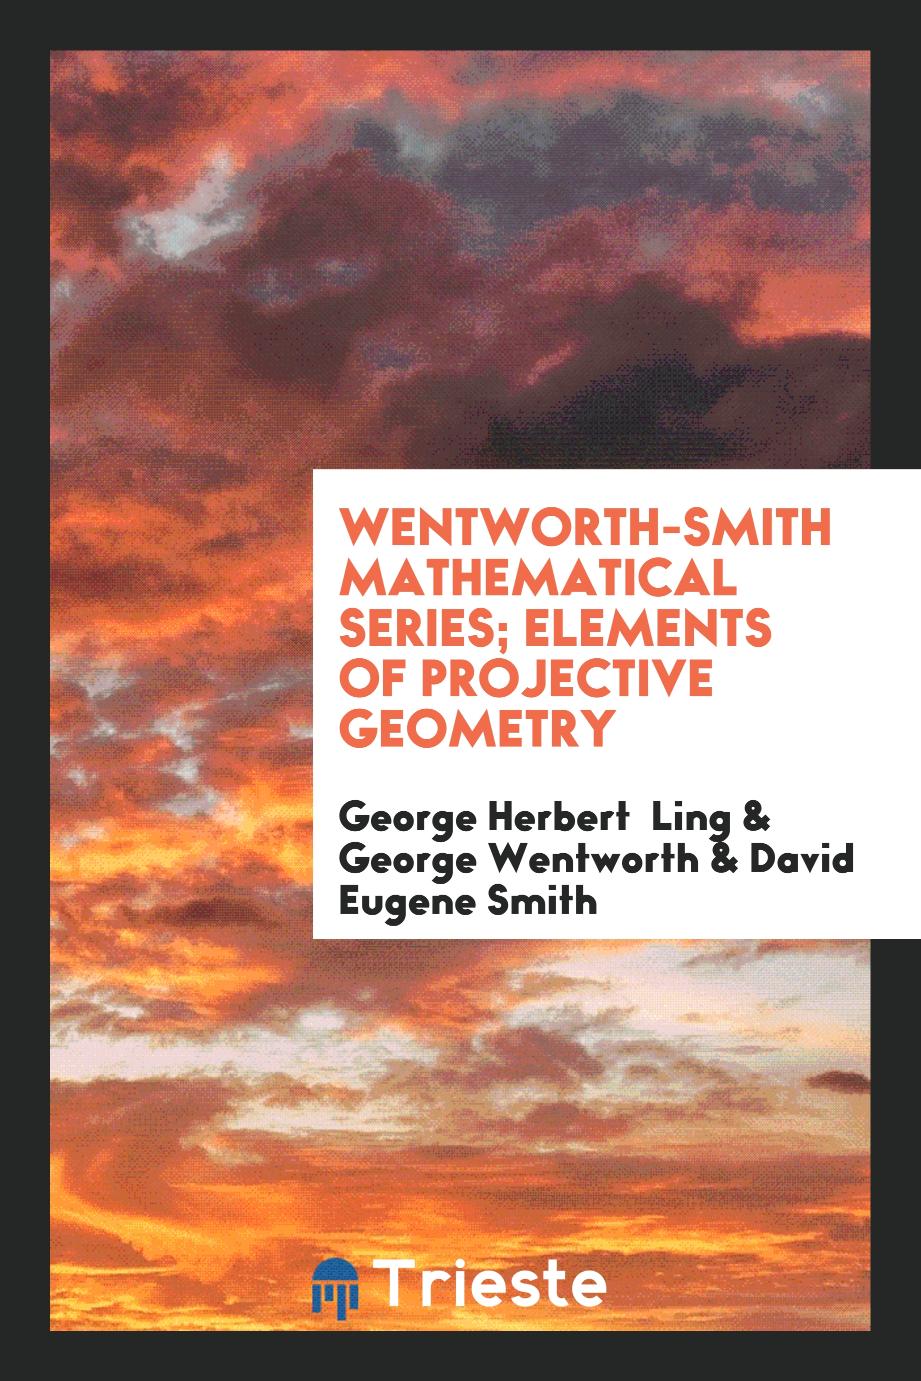 George Herbert Ling, George Wentworth, David Eugene Smith - Wentworth-Smith Mathematical Series; Elements of Projective Geometry